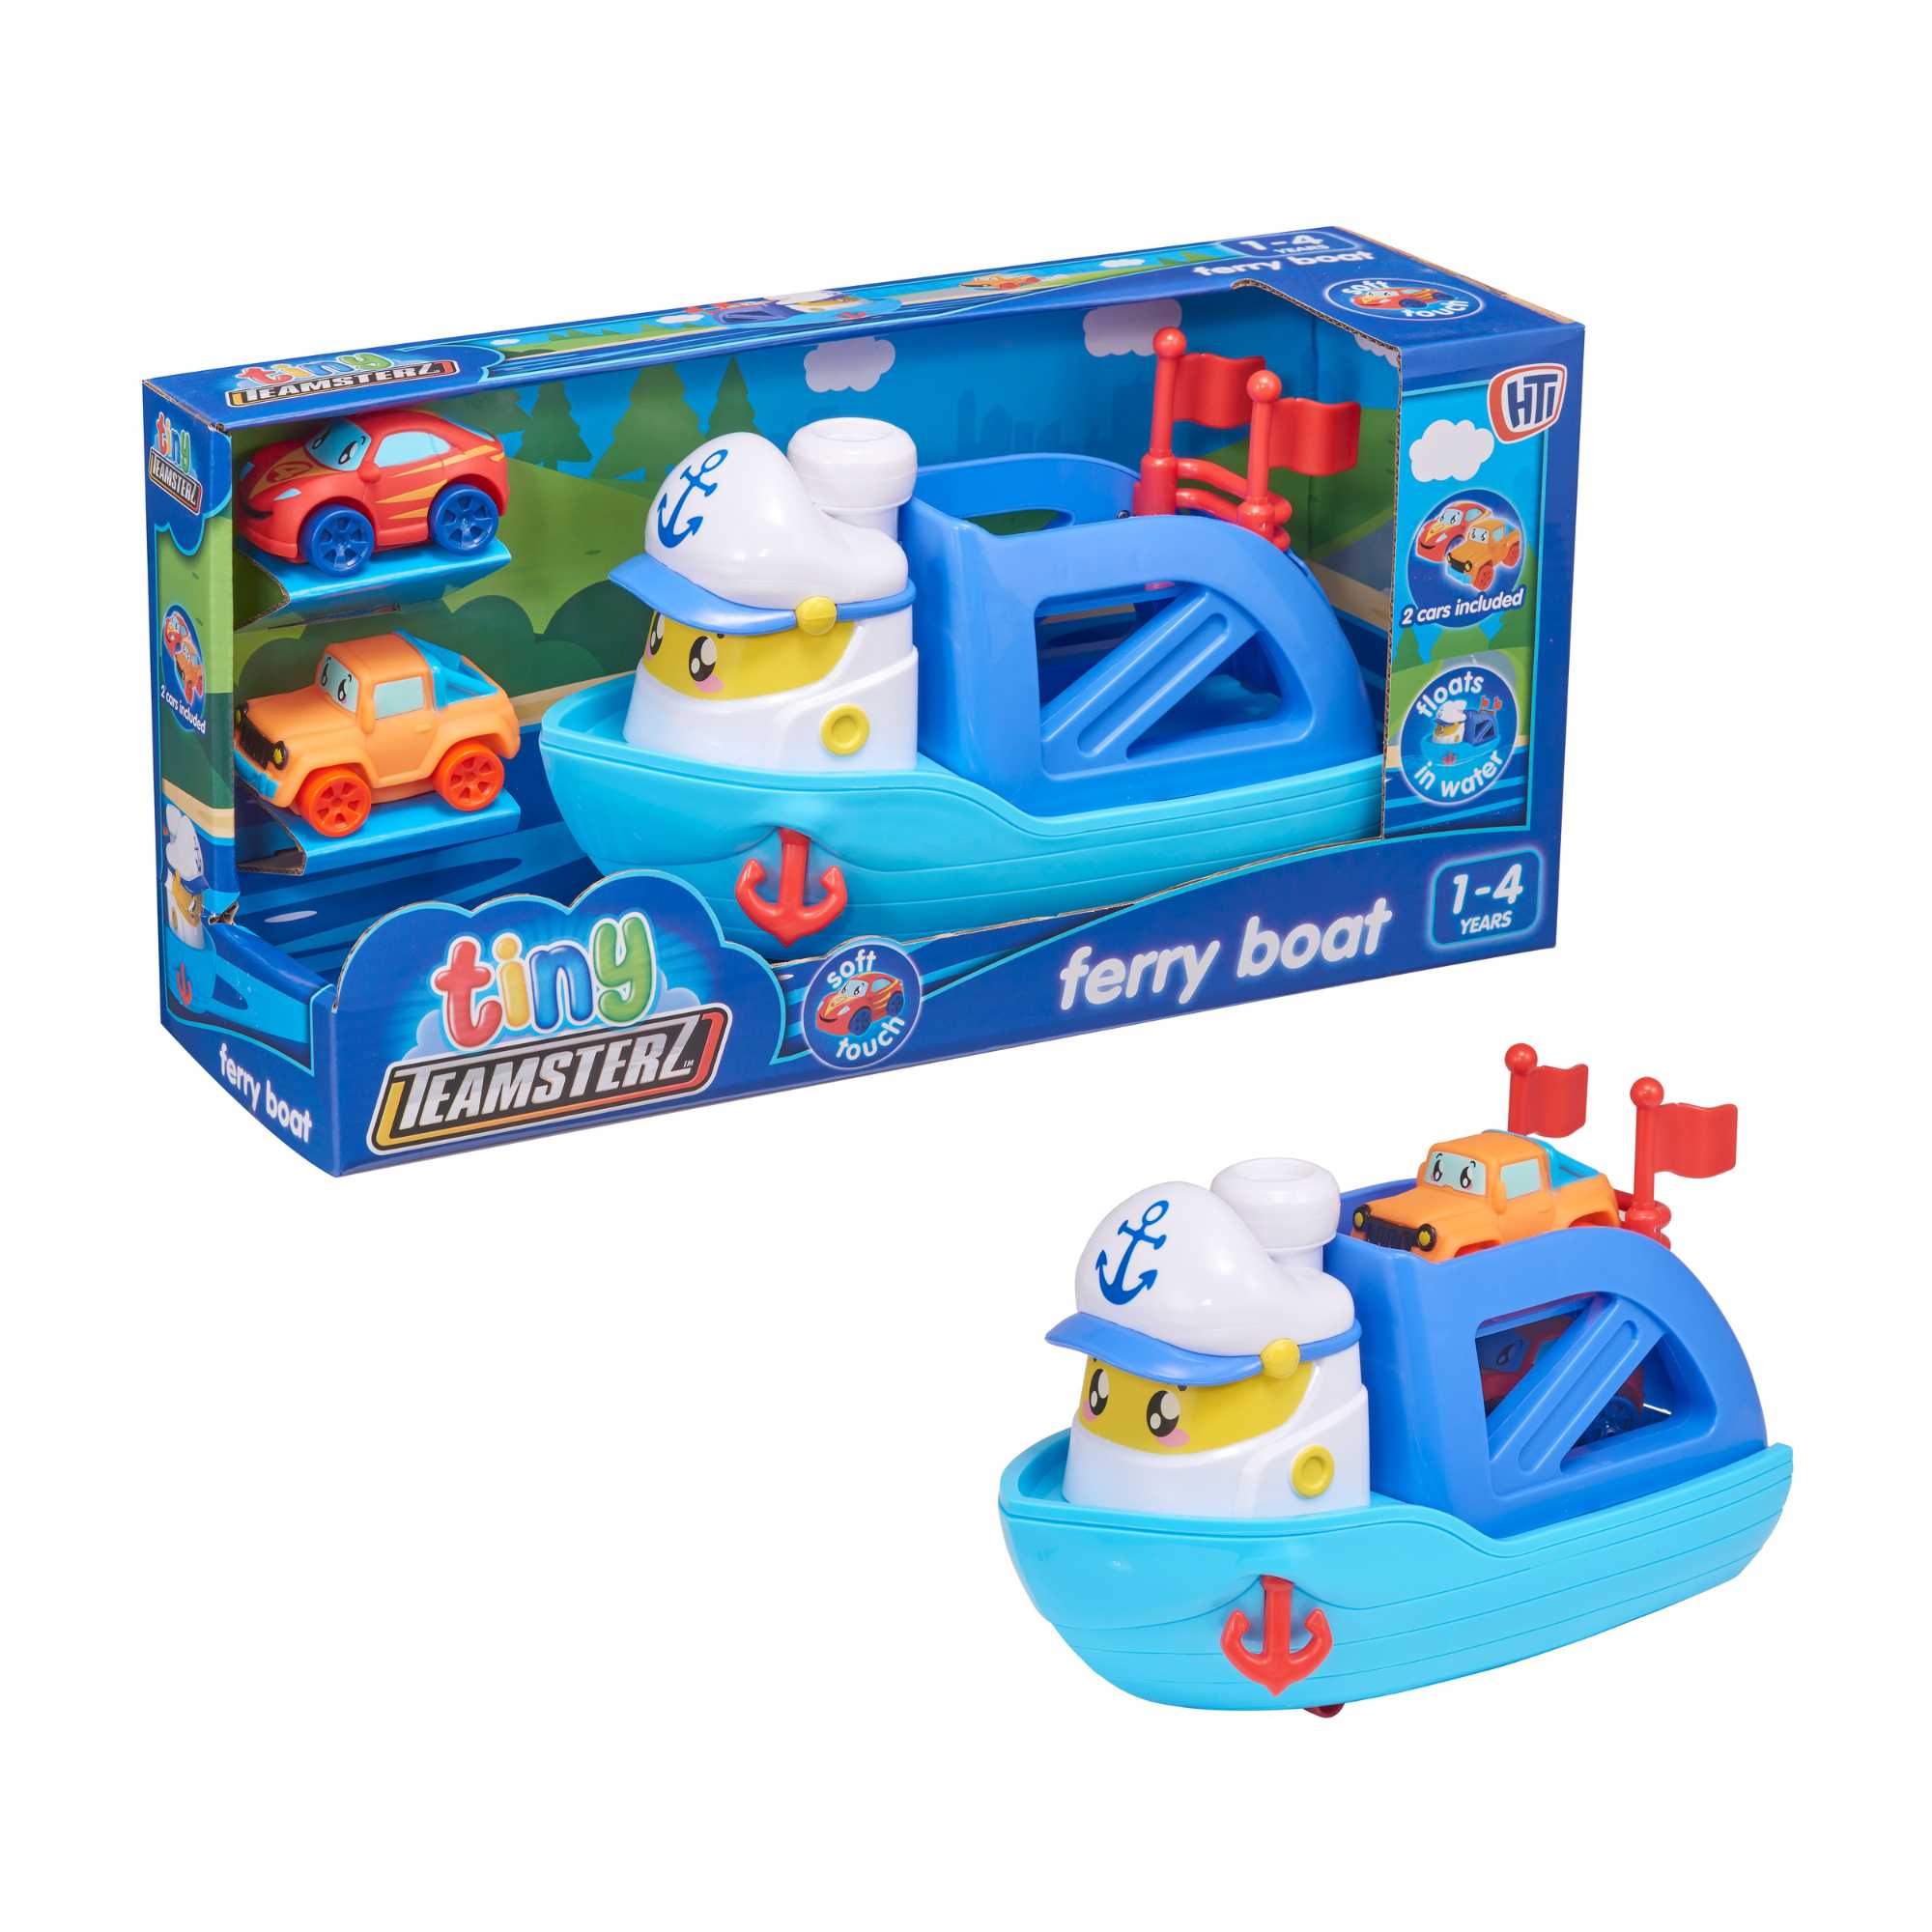 Tiny Teamsterz Ferry Boat Playset